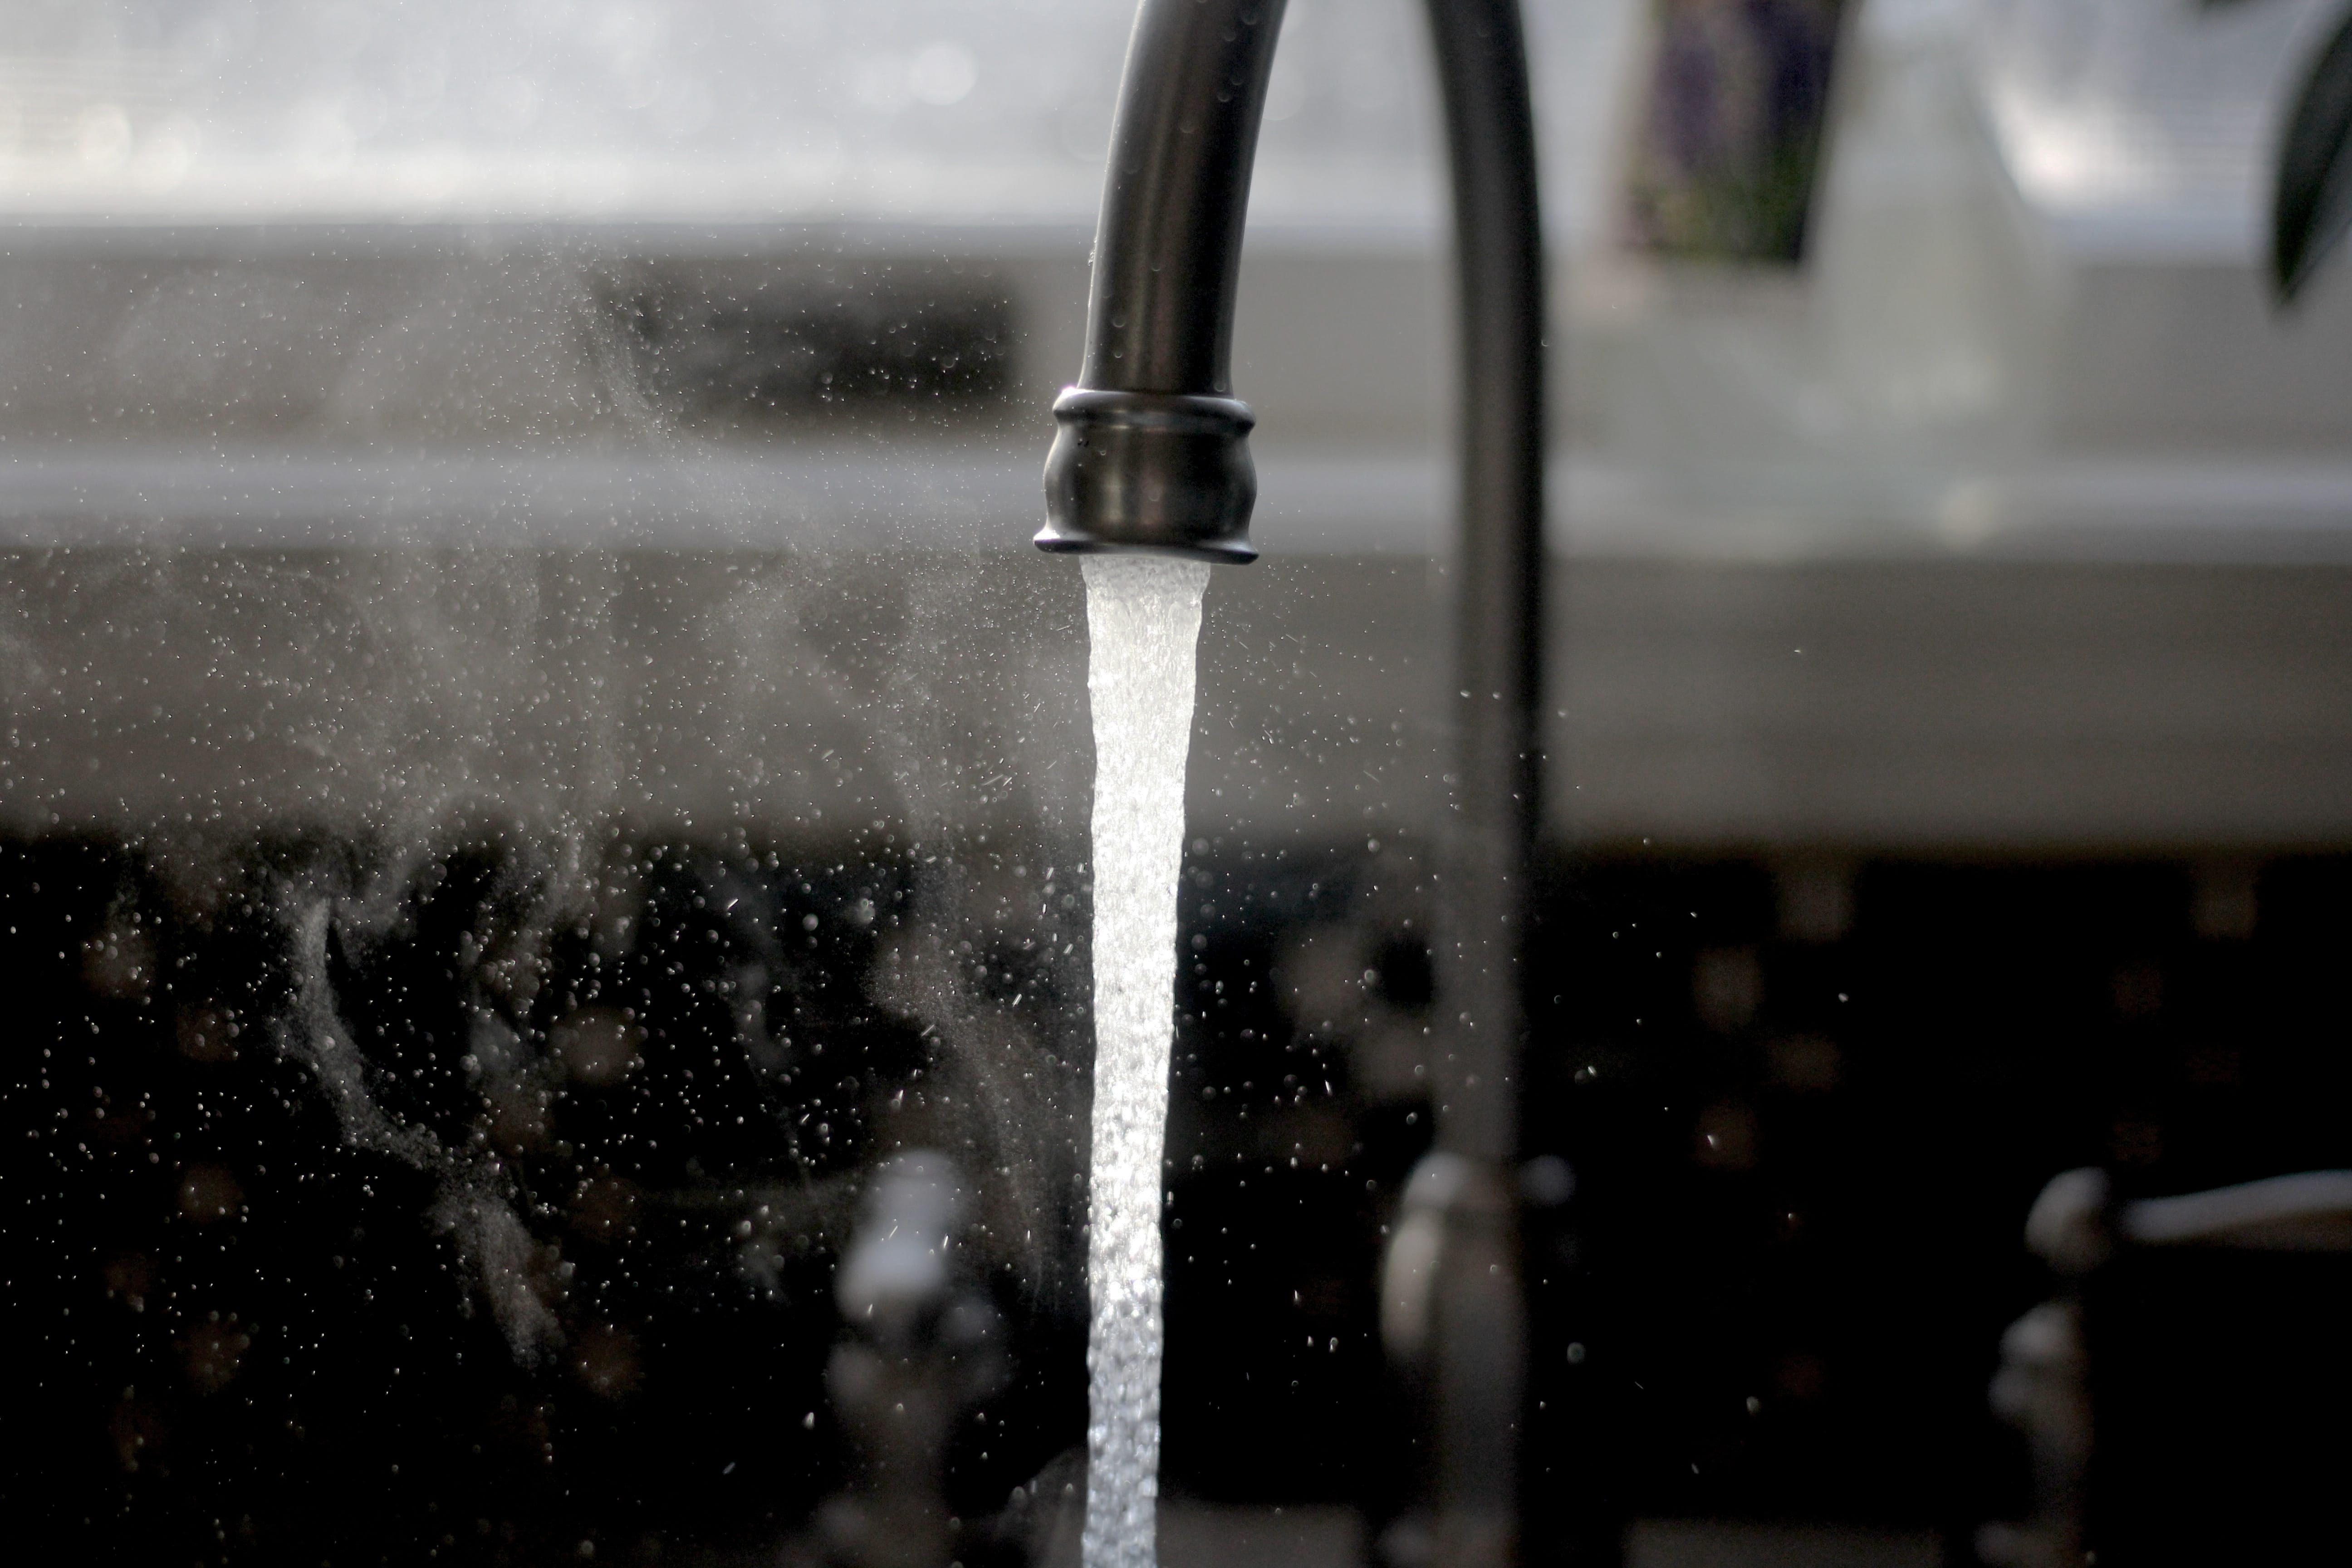 Greyscale photo of running faucet; image by Imani, via Unsplash.com.